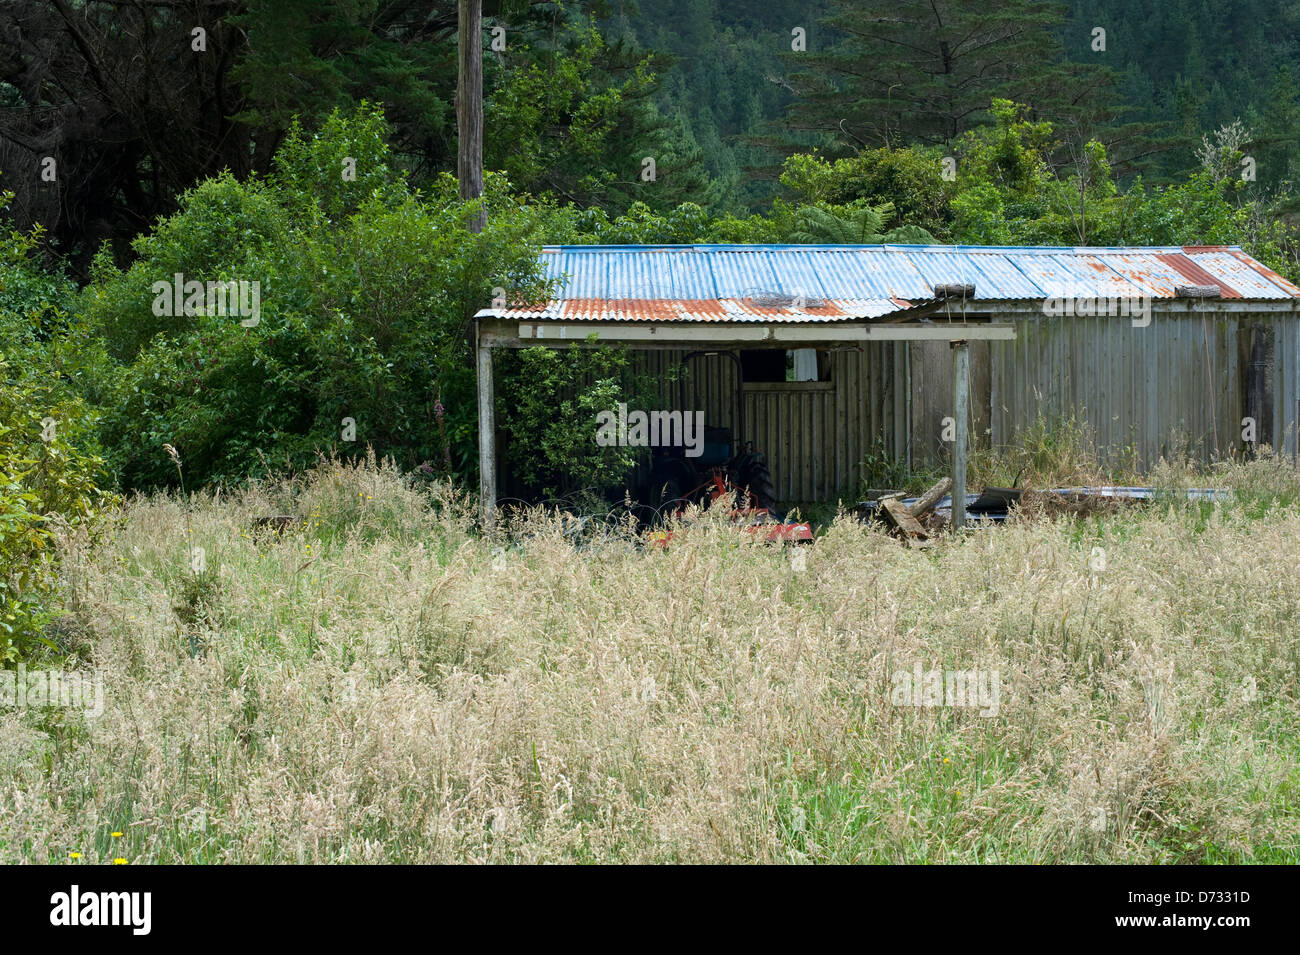 A ramshackle aluminium shed in a wooded area Stock Photo